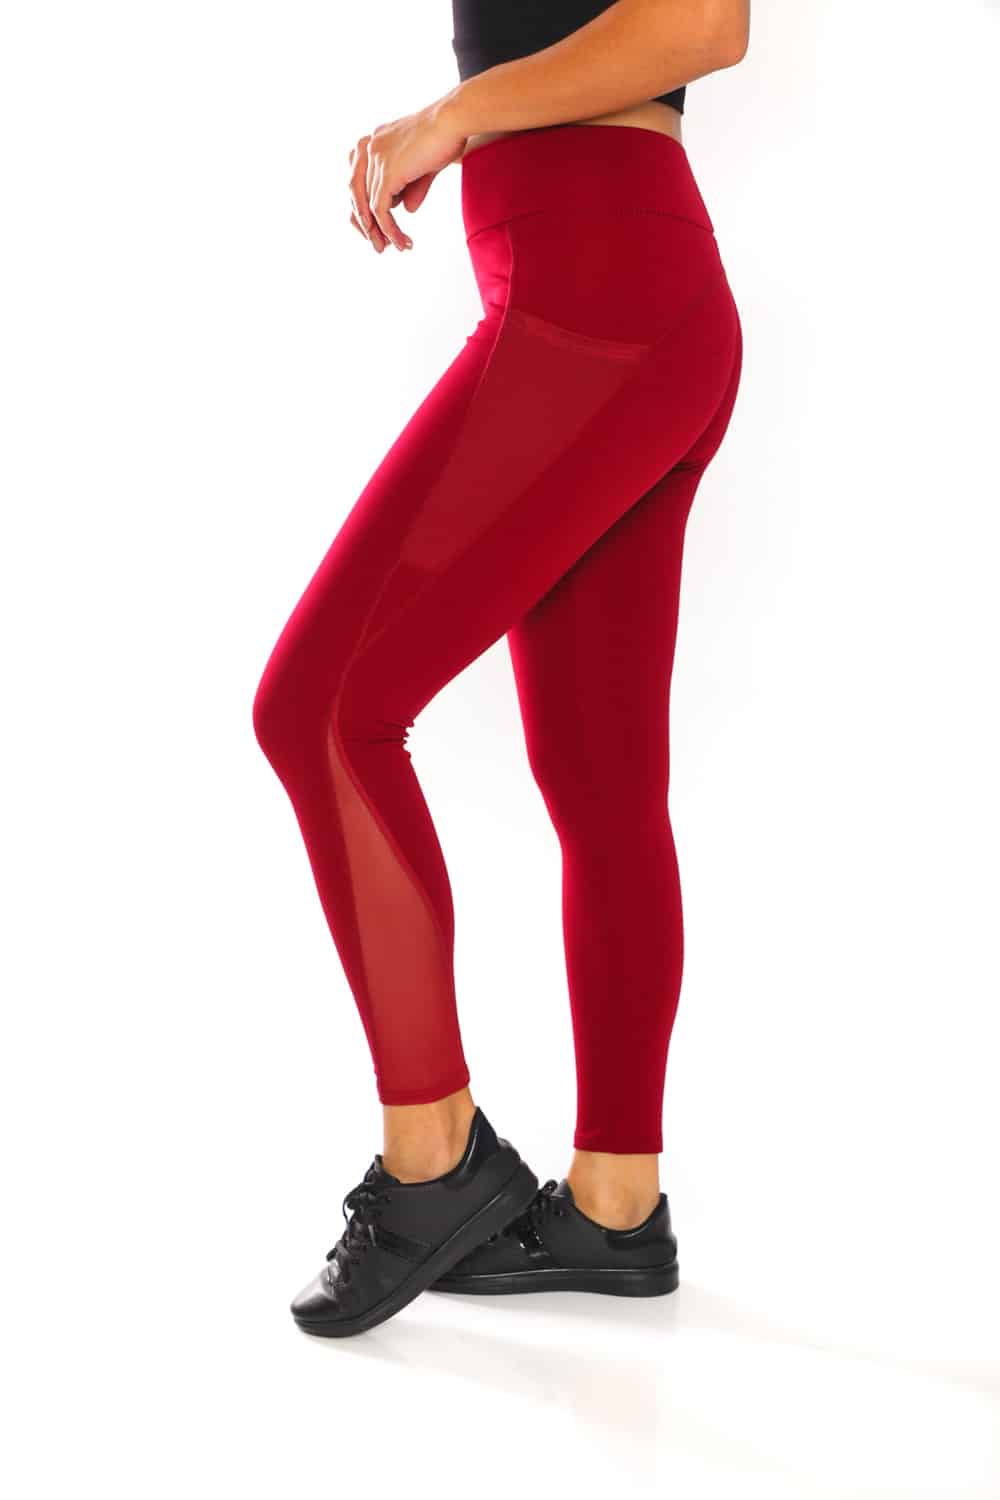 Shadows One leg Leggings with pockets Red – Spaaij Design